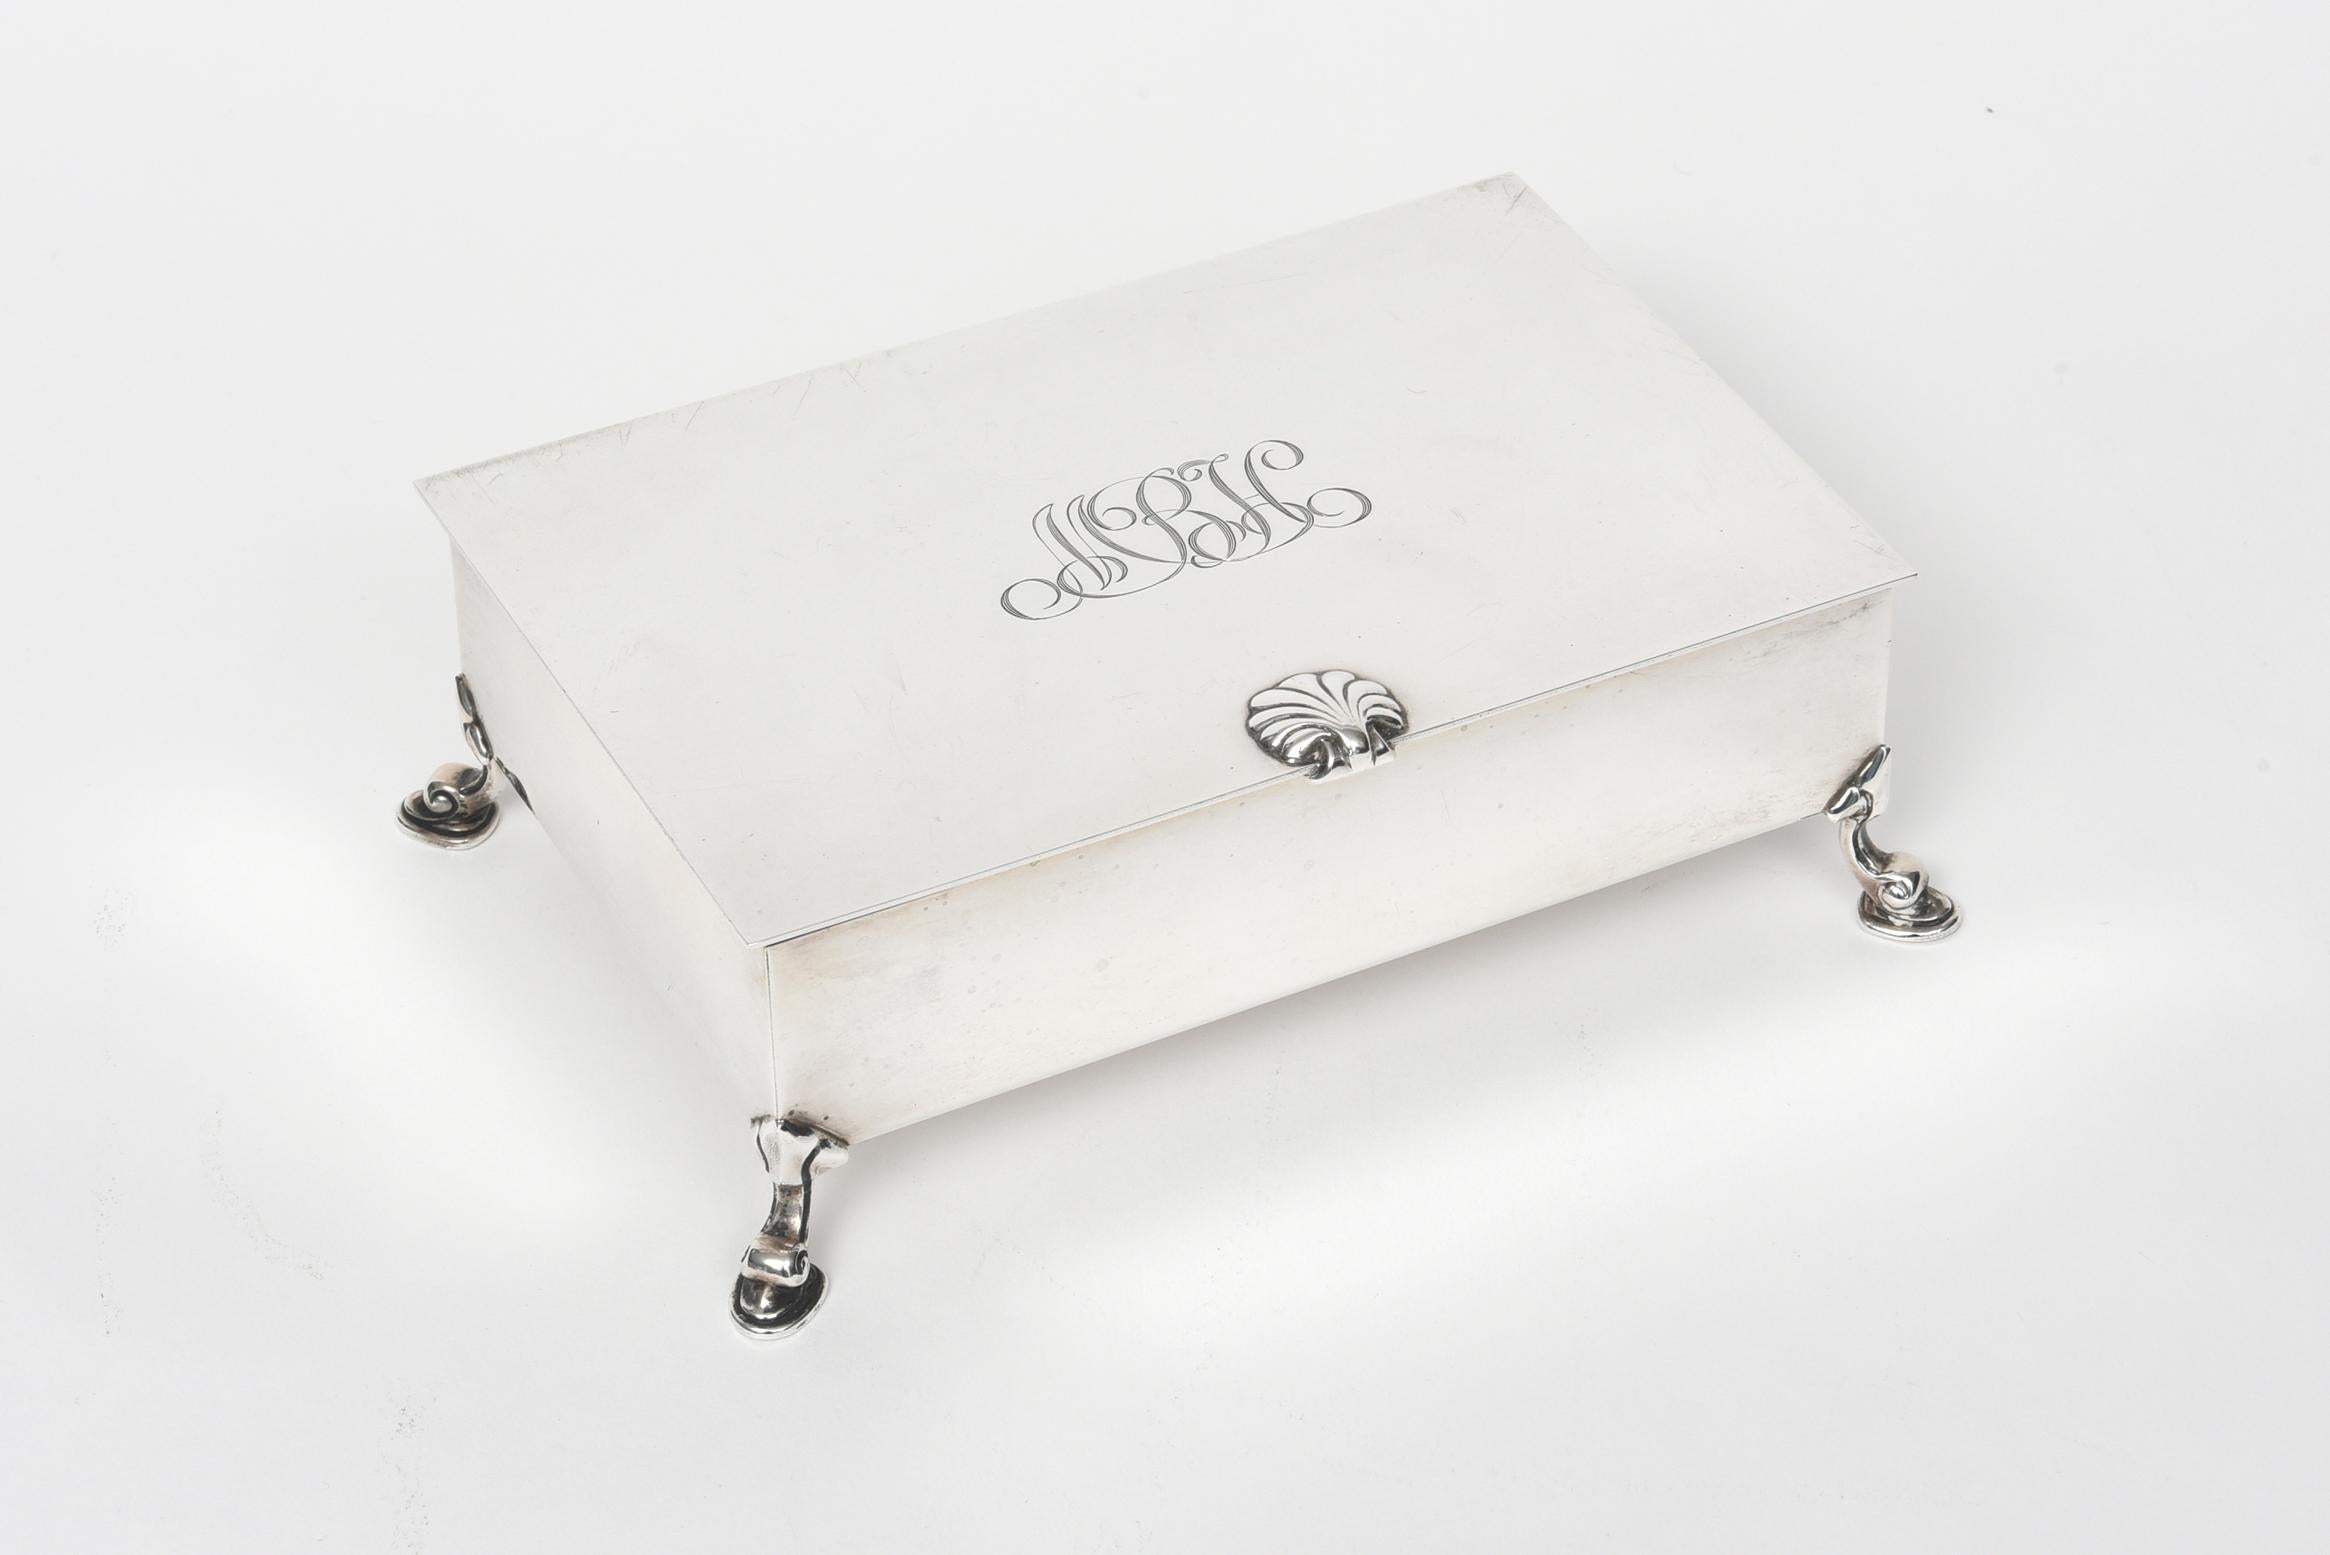 Tiffany & Co. rectangular sterling silver cigarette box rests on four inverted cabriole feet. Top of the box features a seashell detail handle and is initialed 